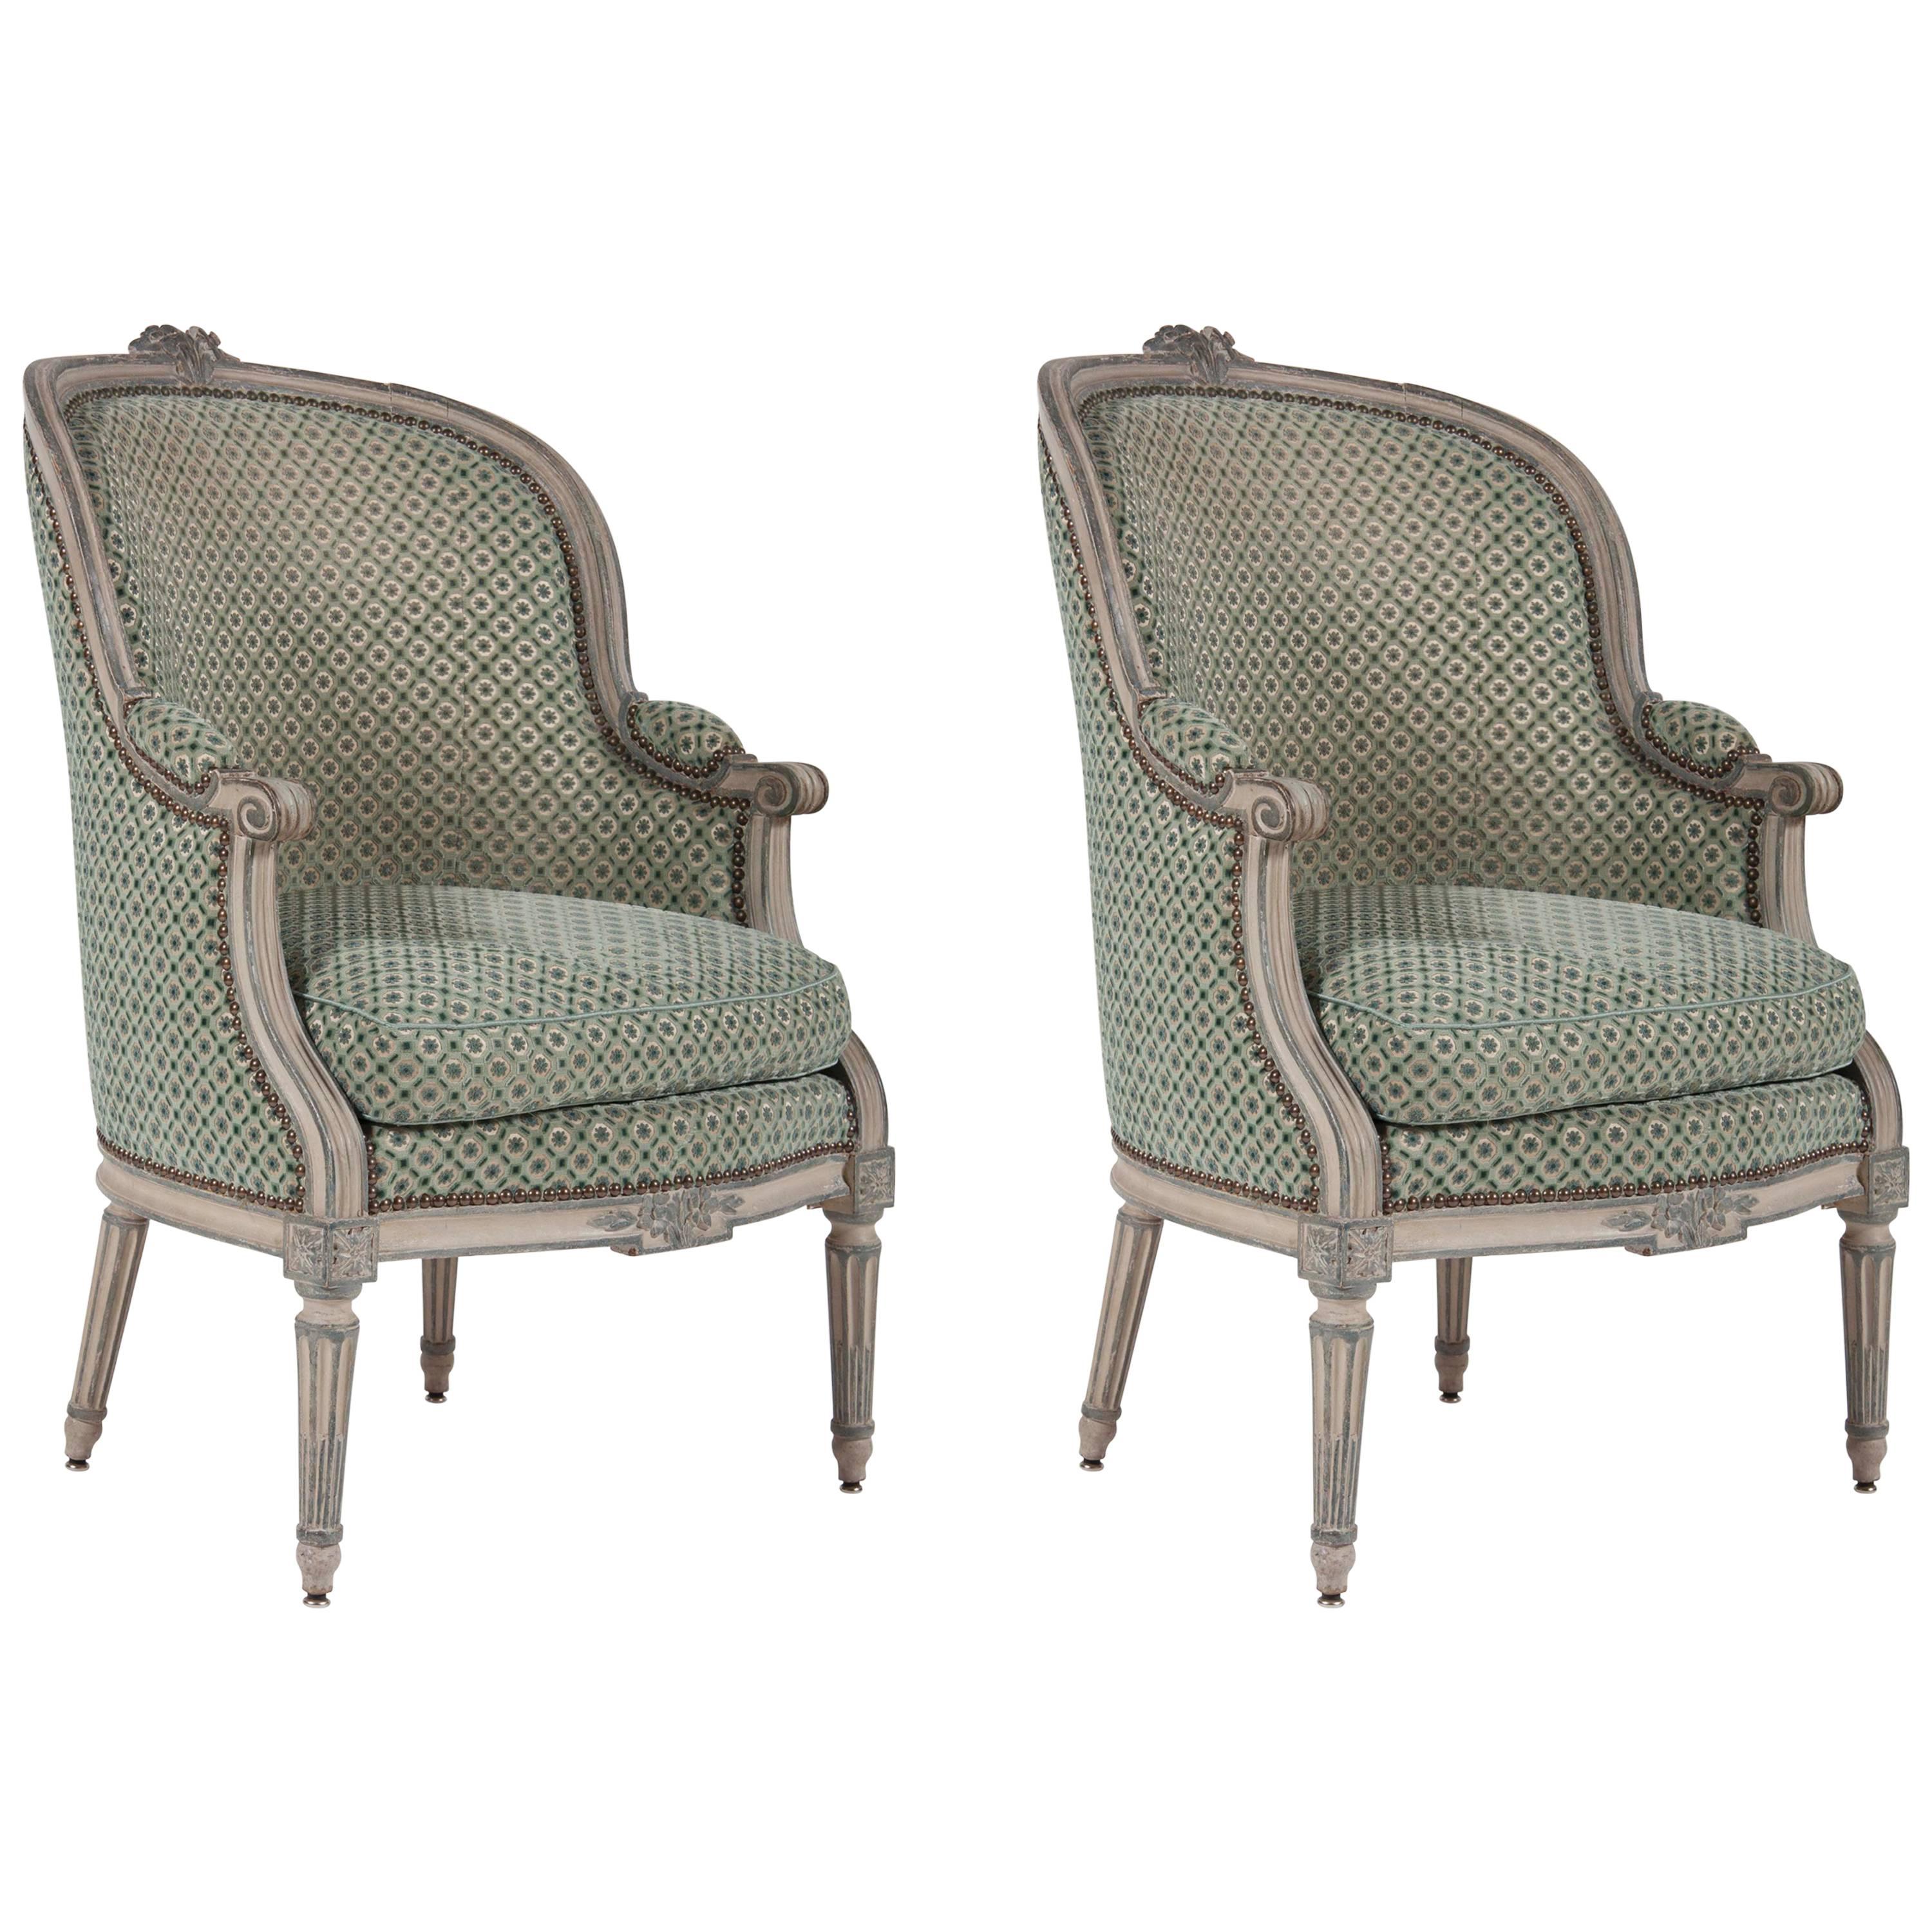 Pair of Louis XVI Blue and Grey Painted Upholstered Bergeres